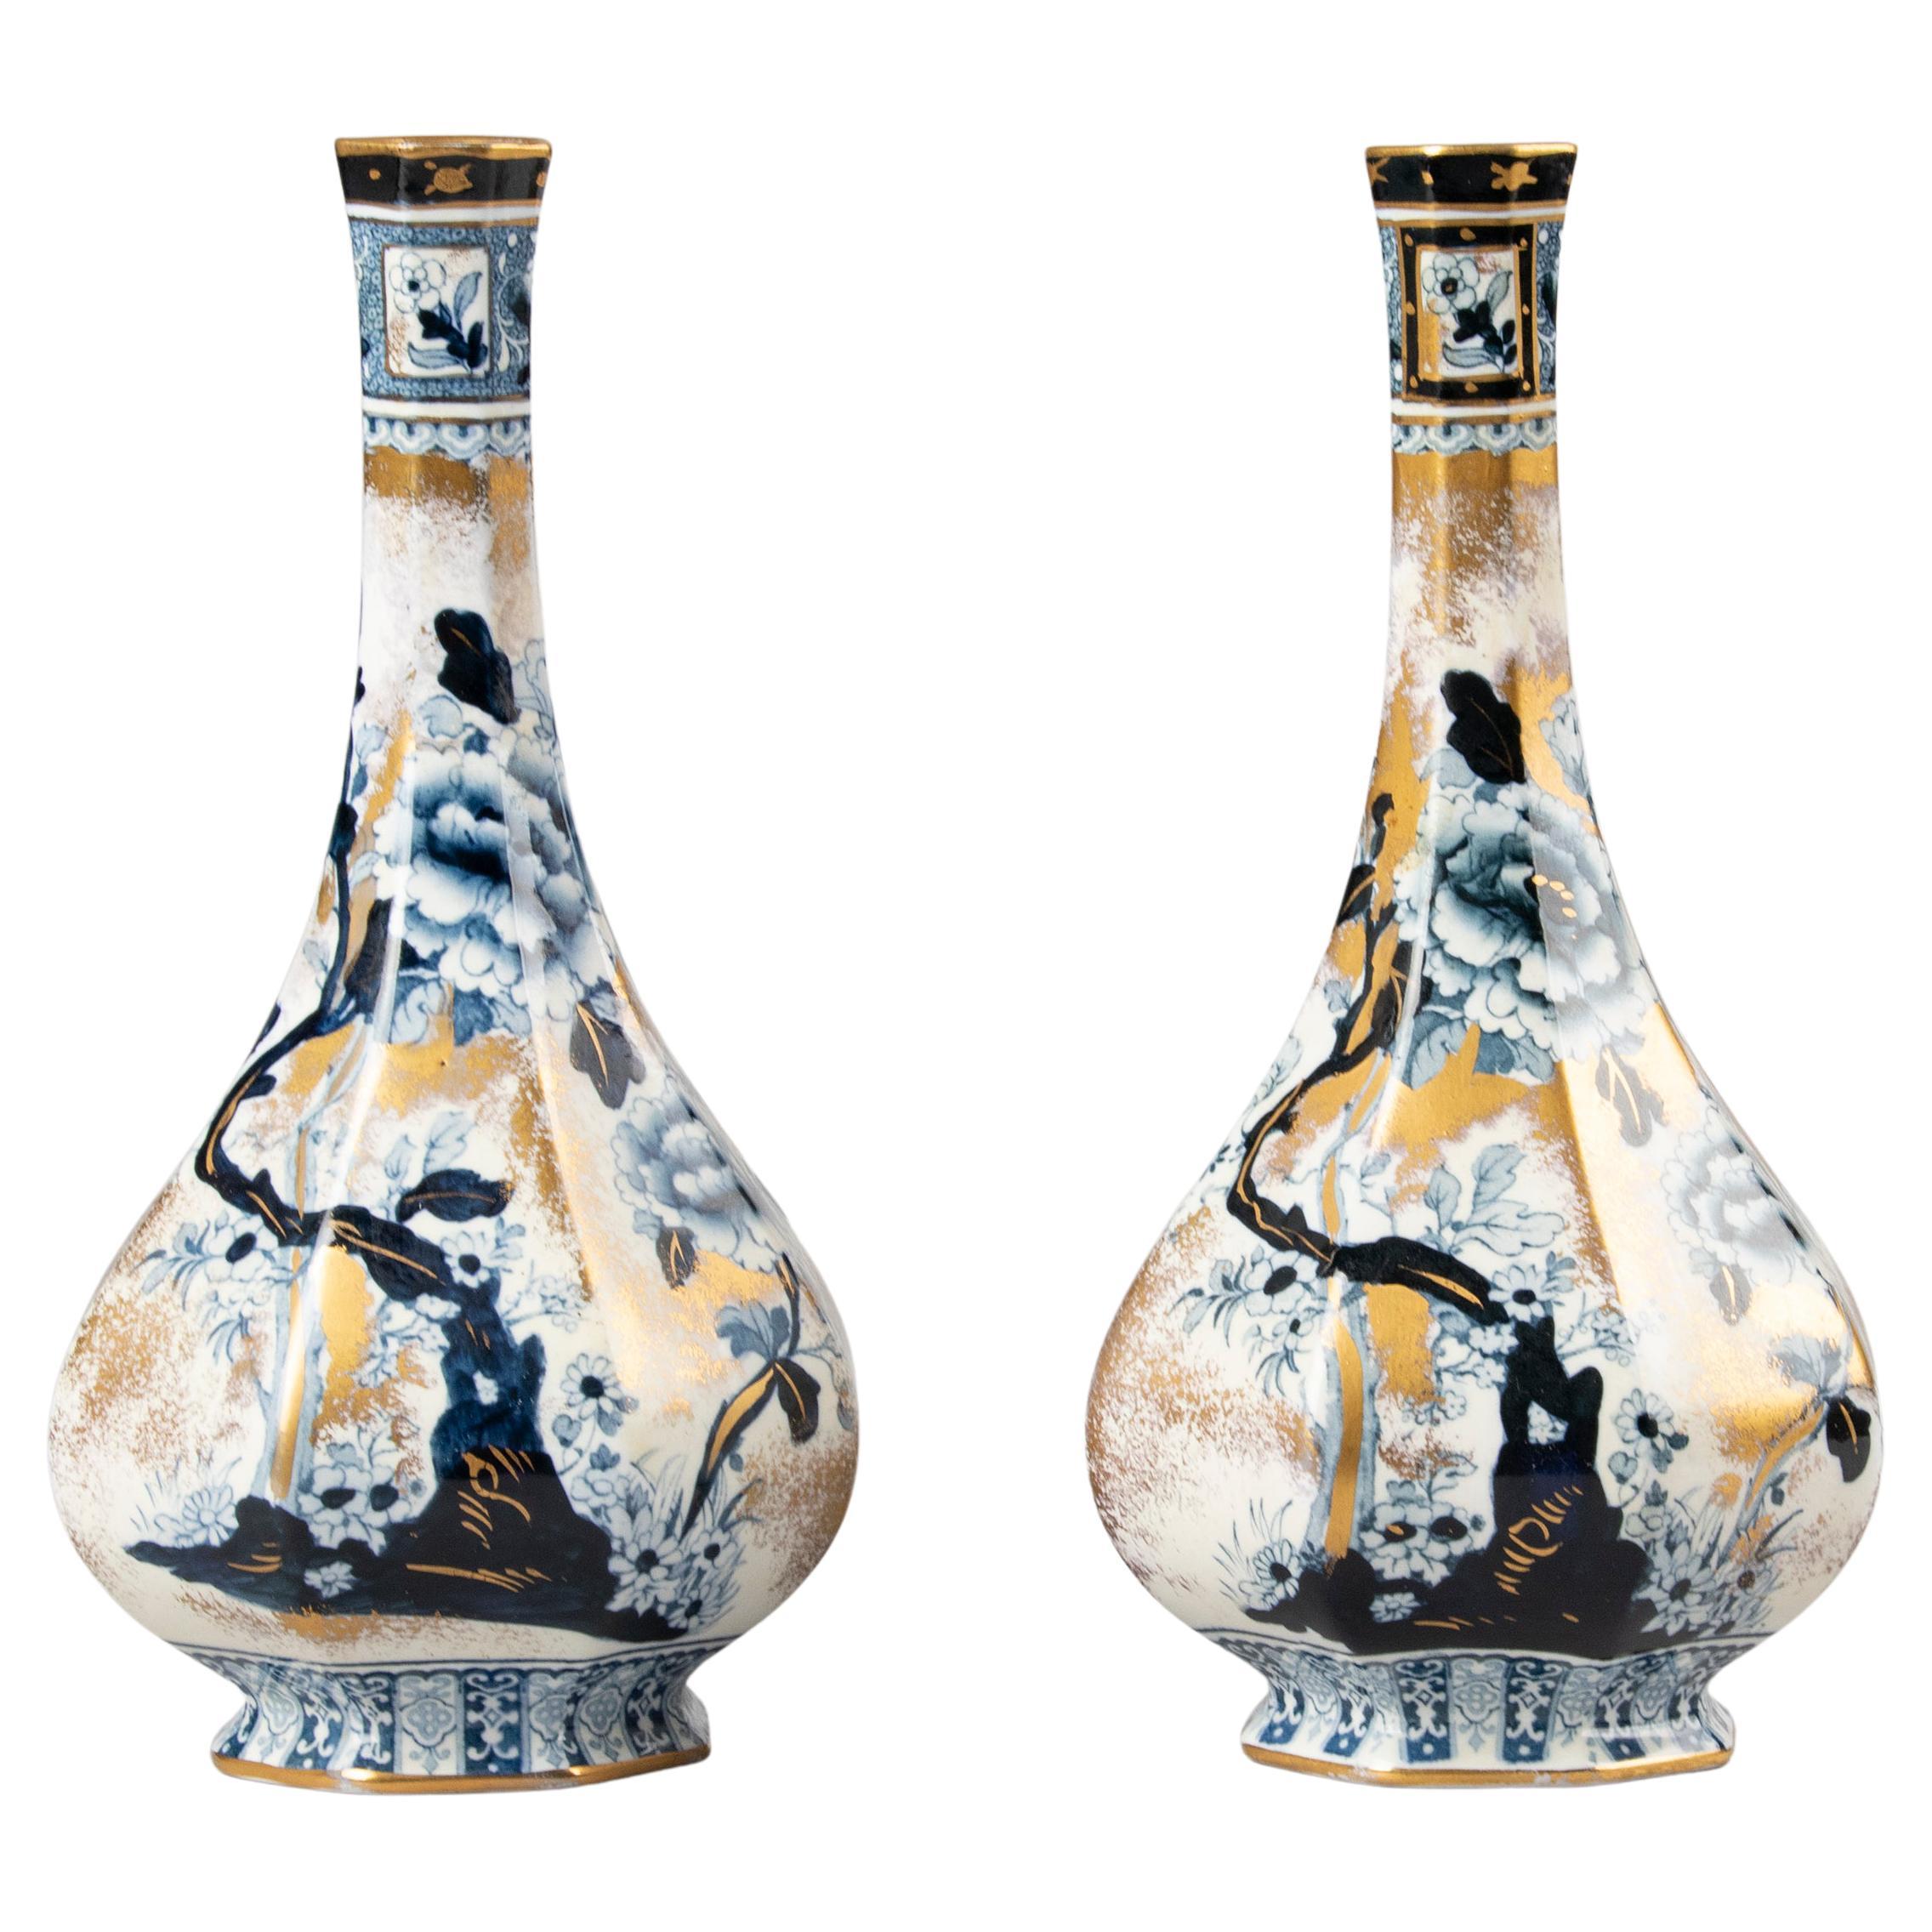 Early 20th Century Porcelain Vases by Keeling & Co Chusan Losol Ware